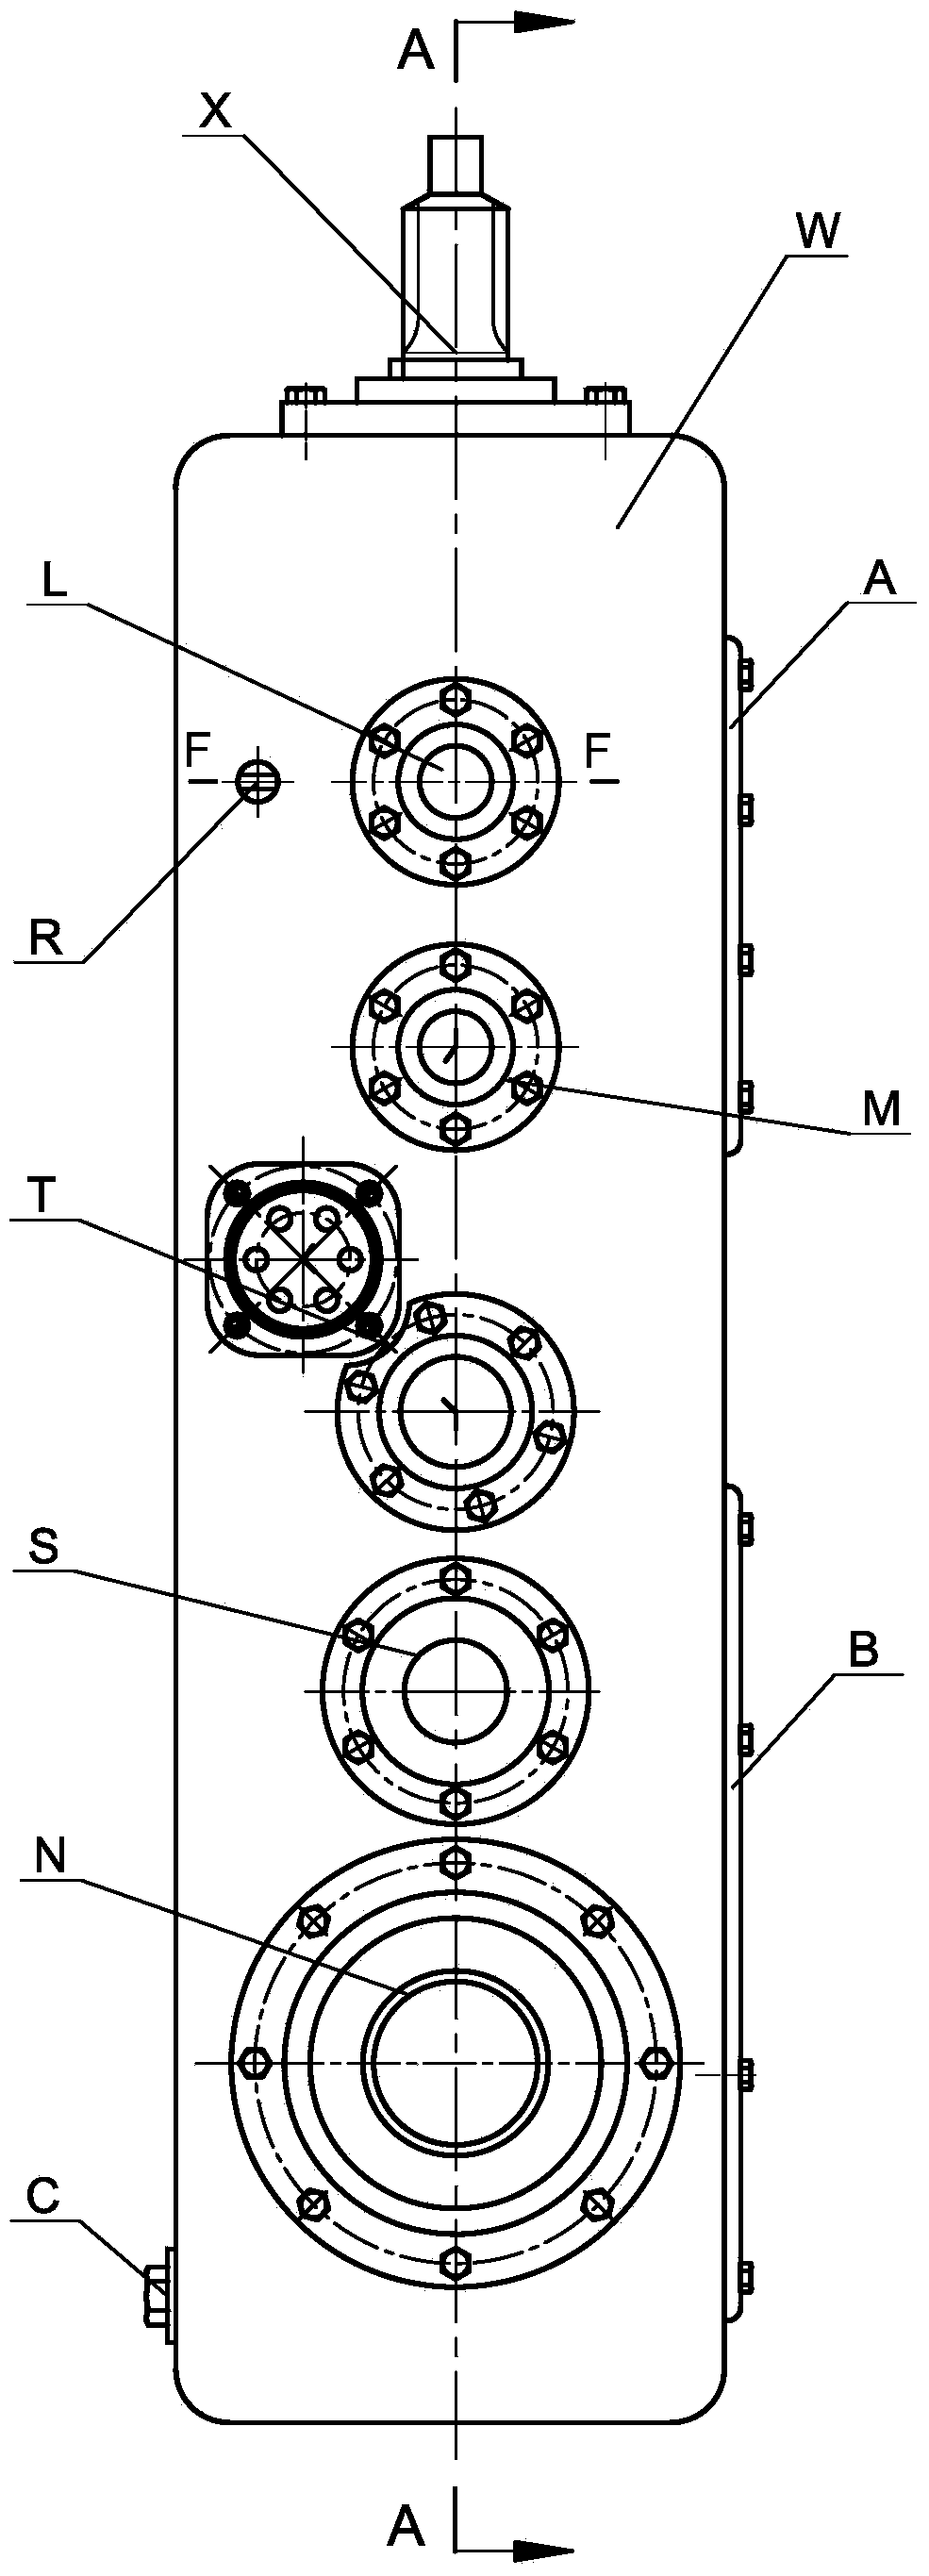 Continuously-variable transmission for mechanical direct-drive hydraulic double-control tracked vehicle